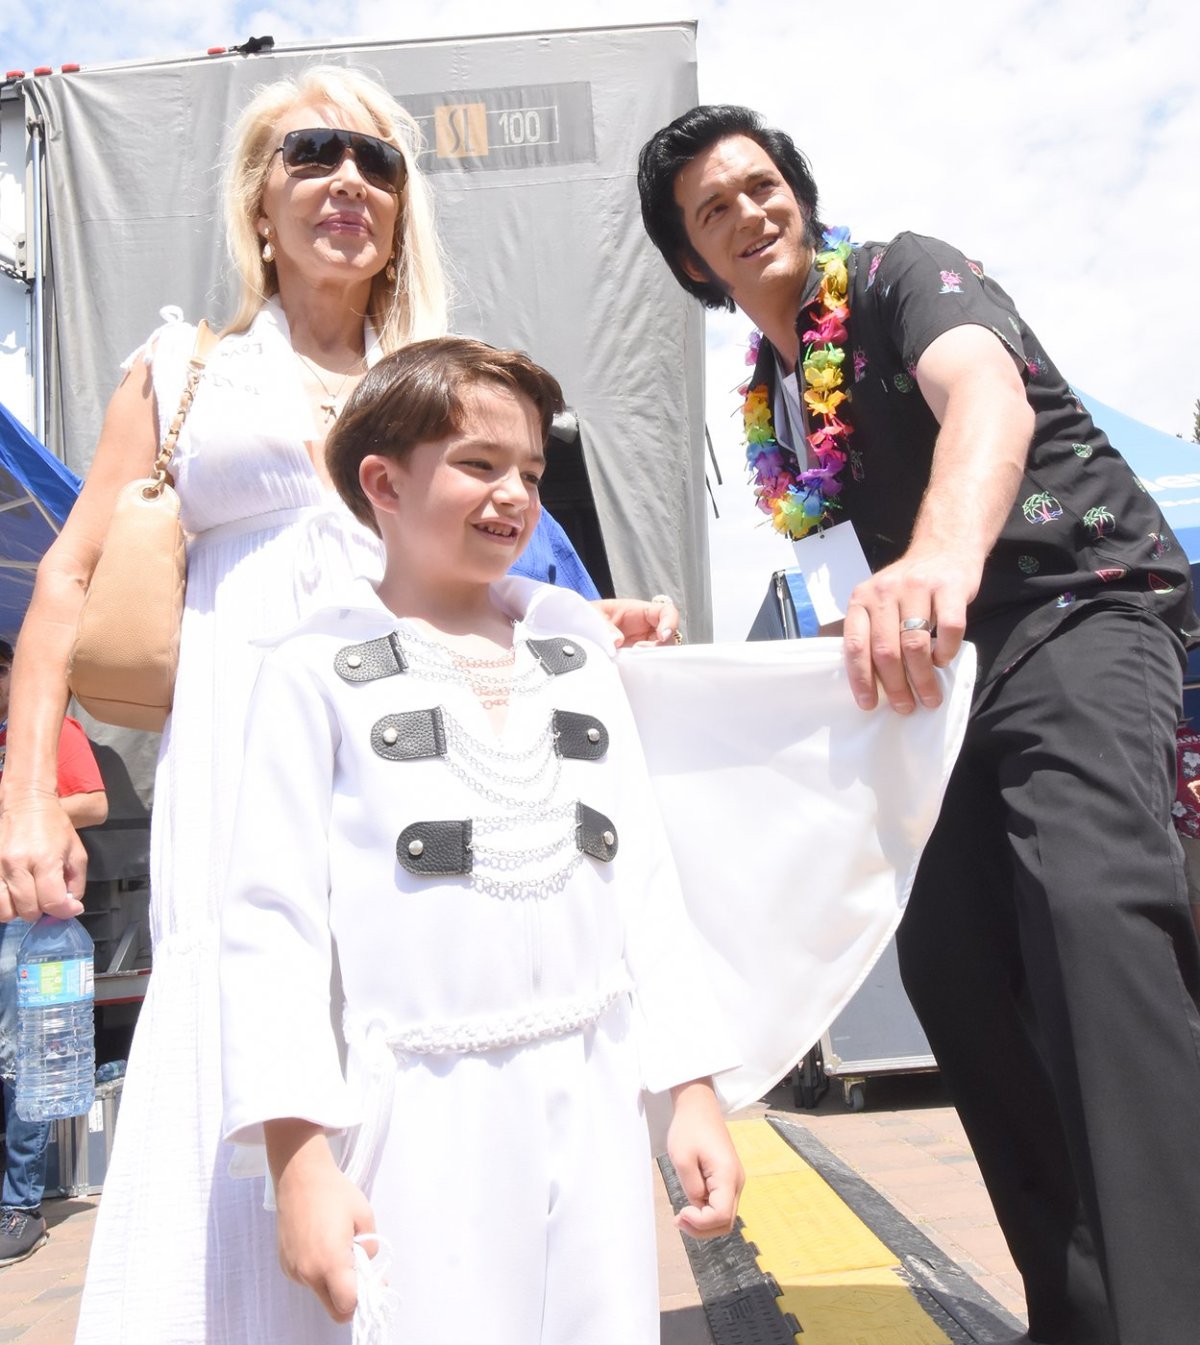 Six-year-old Noah Fitzpatrick with his dad, pro Elvis tribute artist Adam Fitzpatrick, and Linda Thompson, a former girlfriend of Elvis. Thompson and her brother Sam were special guests at the Penticton Pacific Northwest Elvis Festival. Fitzpatrick is a former Penticton resident who finished second in the finals this year.